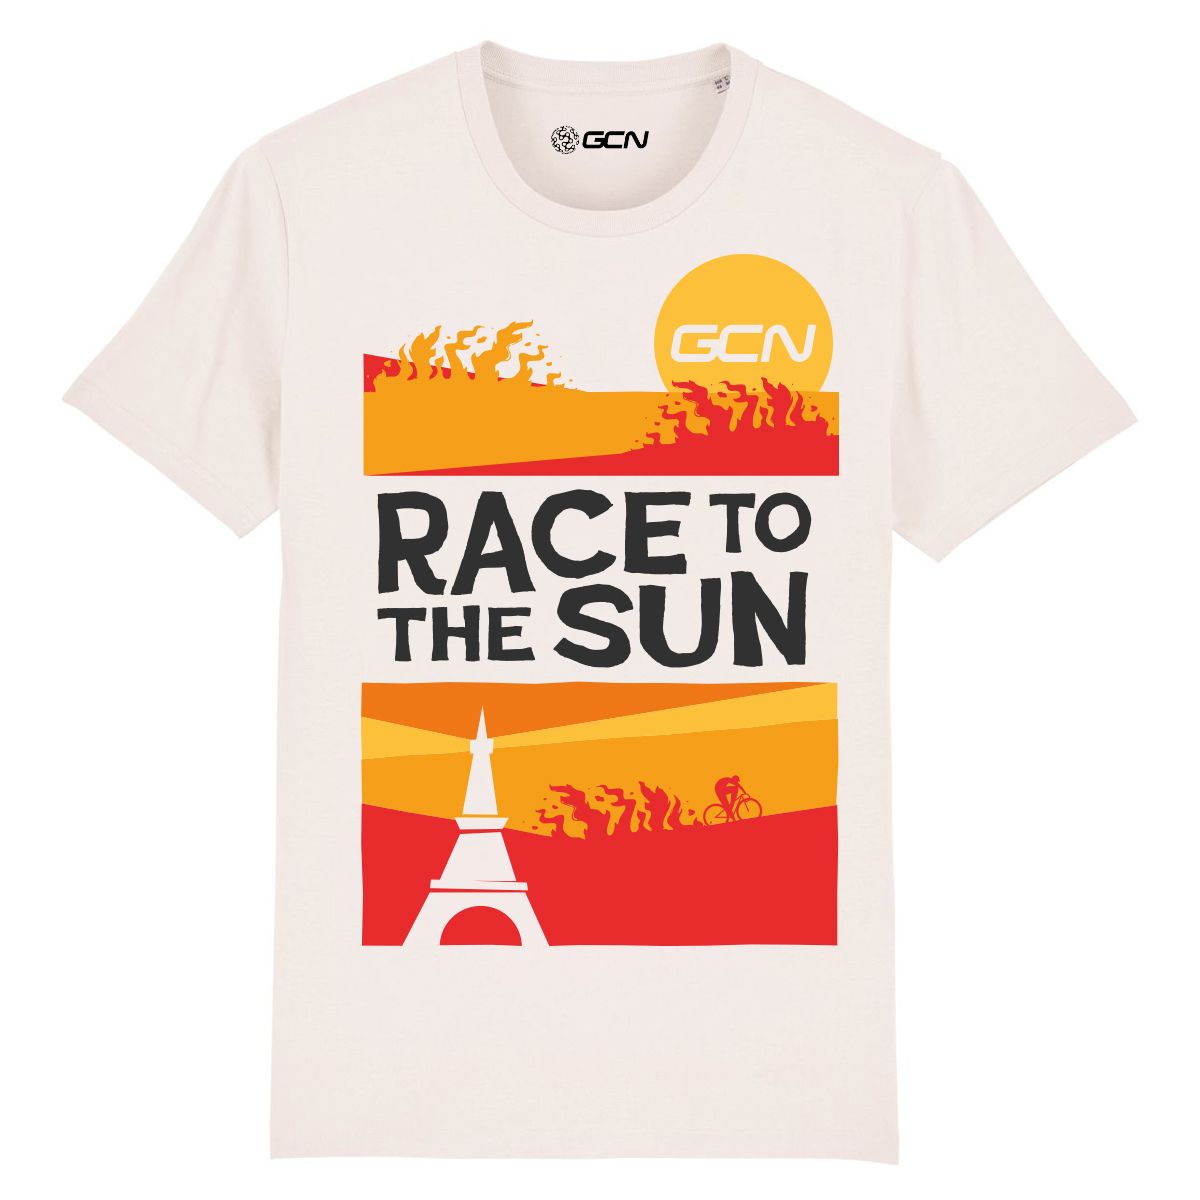 GCN Race To The Sun T-Shirt - Vintage White